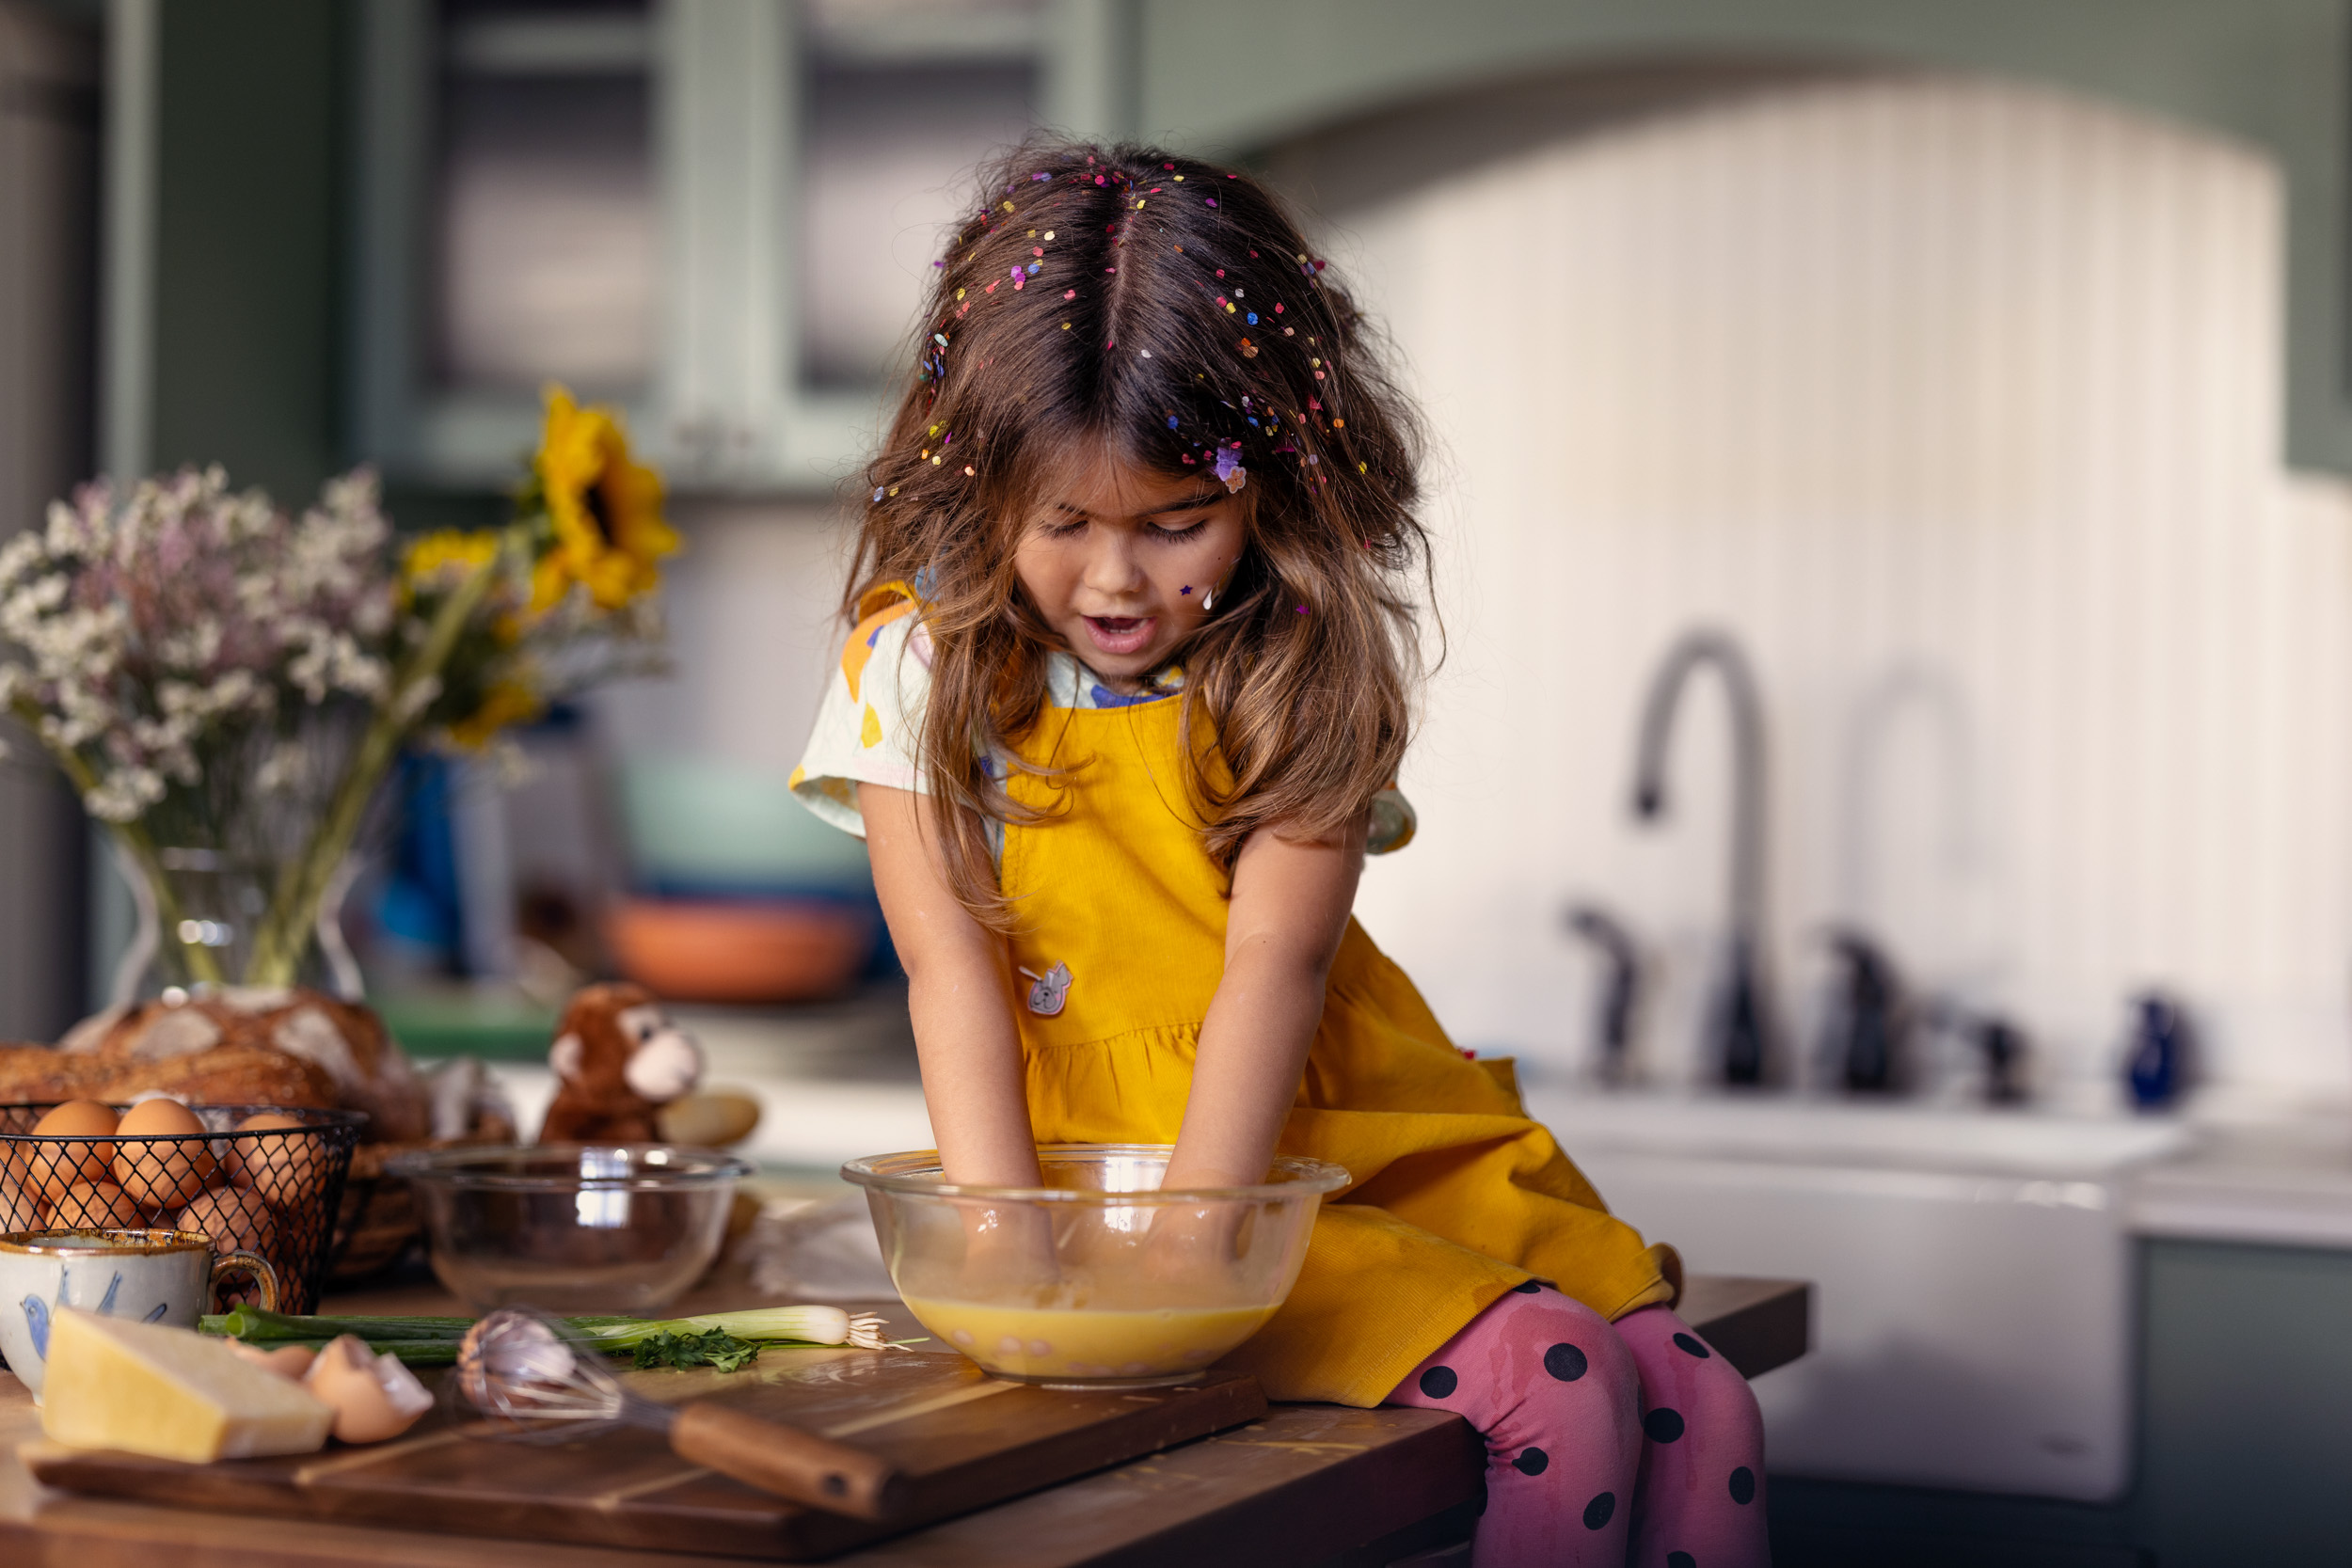 young girl with confetti in hair mixing food in bowl in kitchen